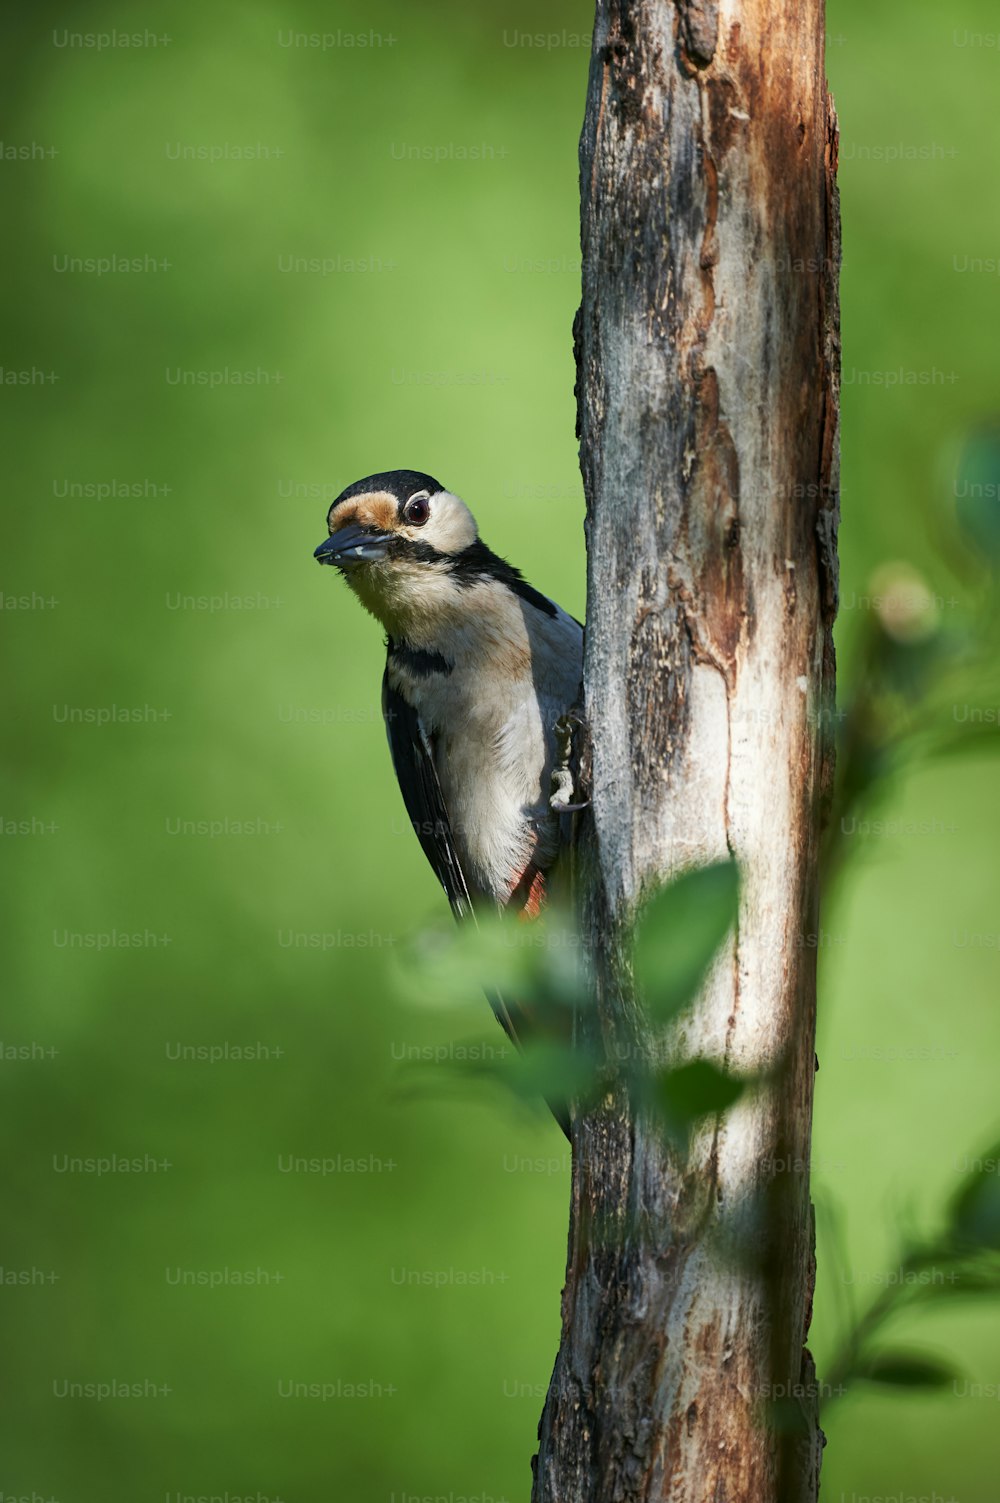 Curious great spotted woodpecker  looks from behind a tree